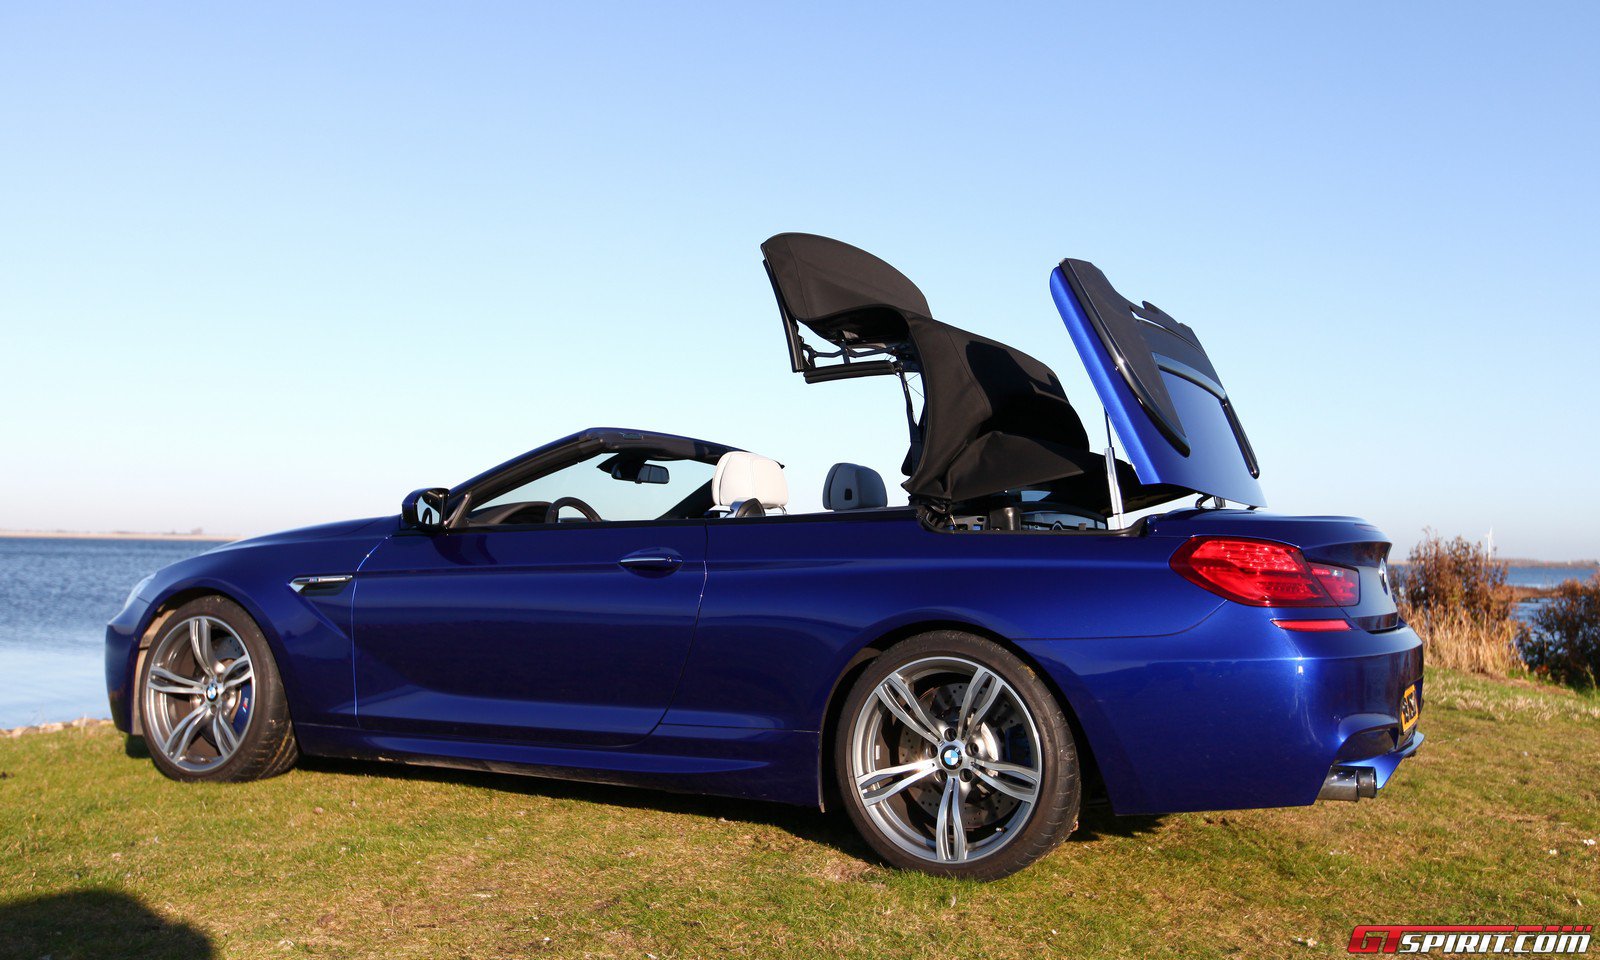 2012 Bmw m6 convertible road test #3